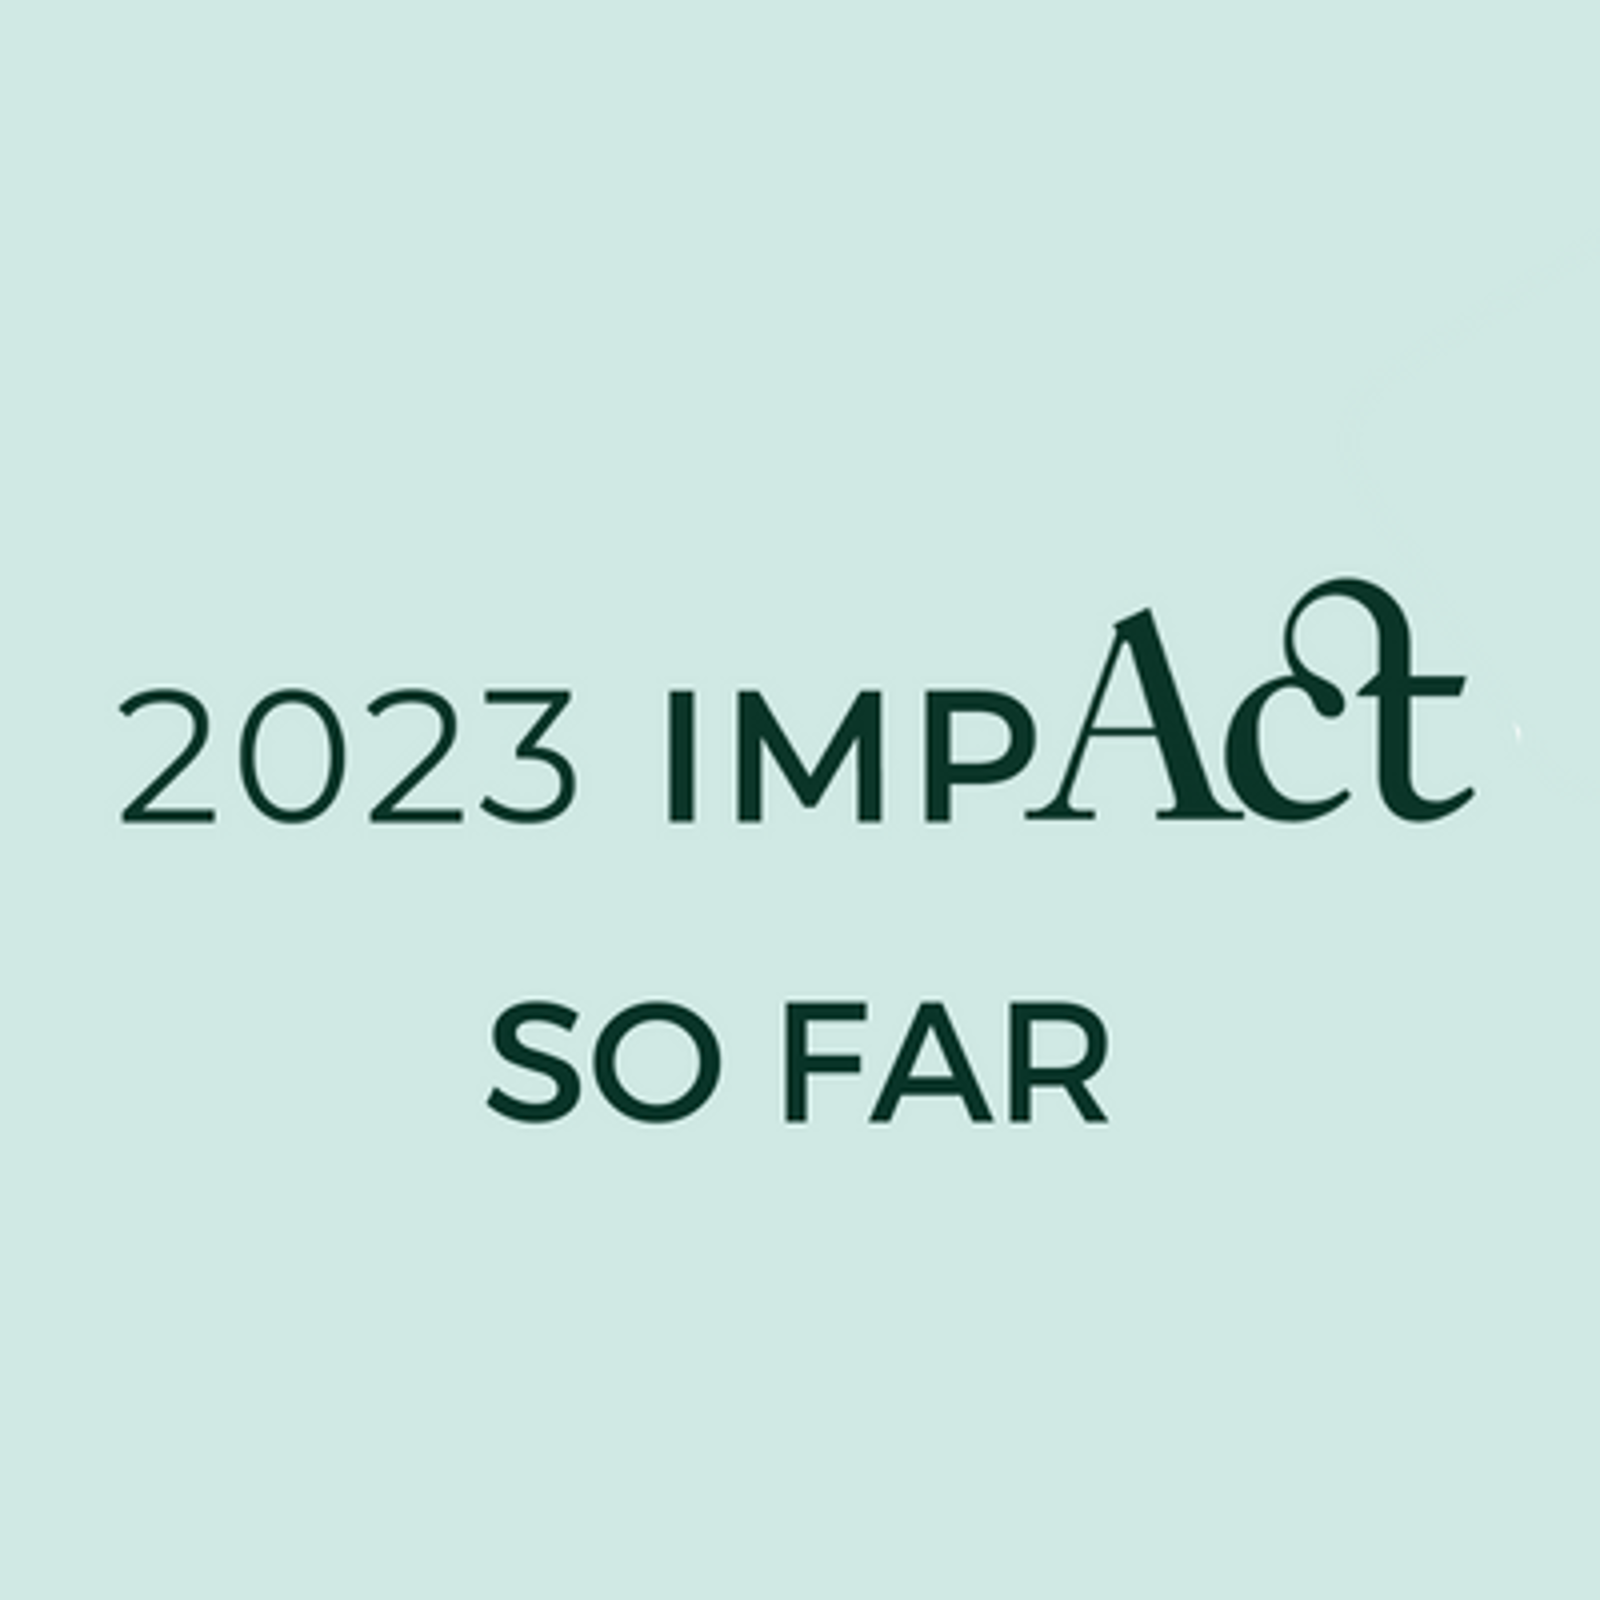 ACT's impact in 2023 So far